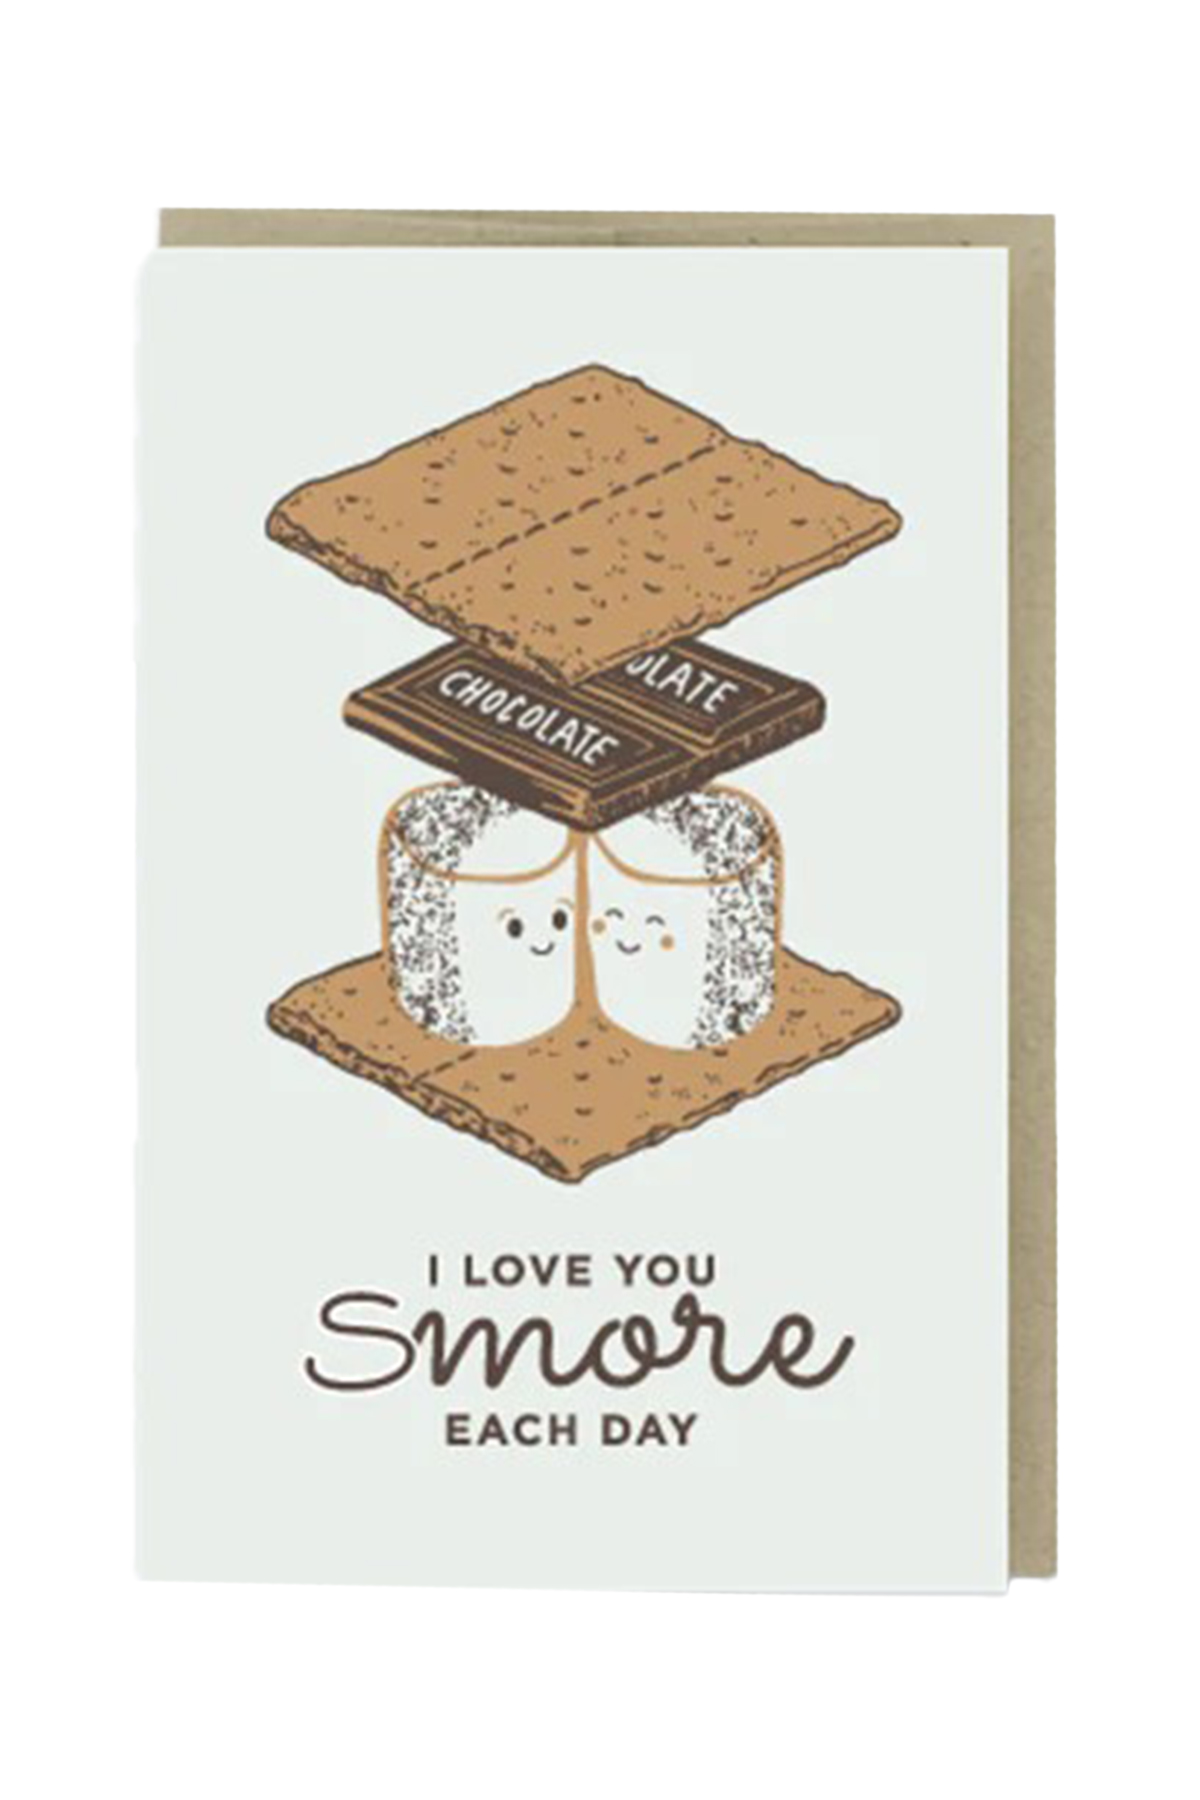 S'mores Each Day Favor the kind Cards